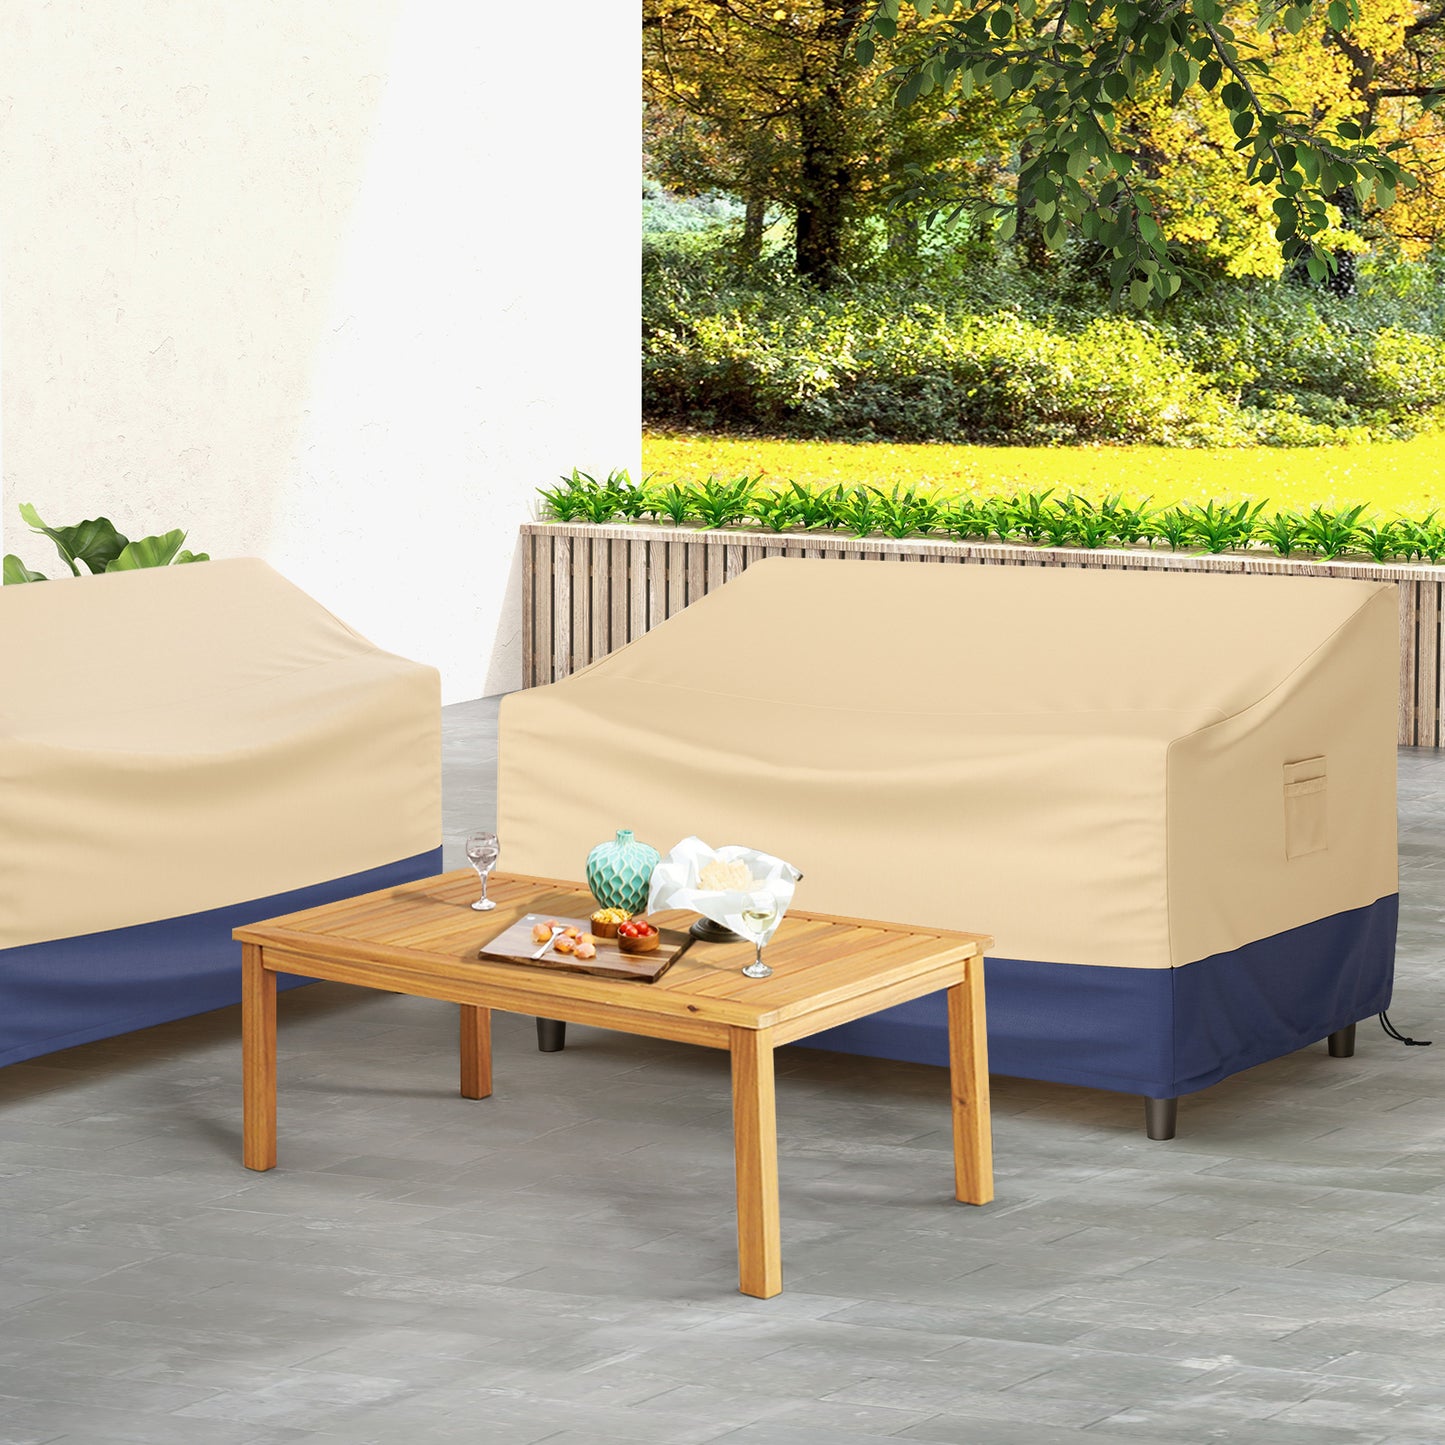 Patio Furniture Cover with Padded Handle and Click-Close Straps-60 x 43 x 30 inches